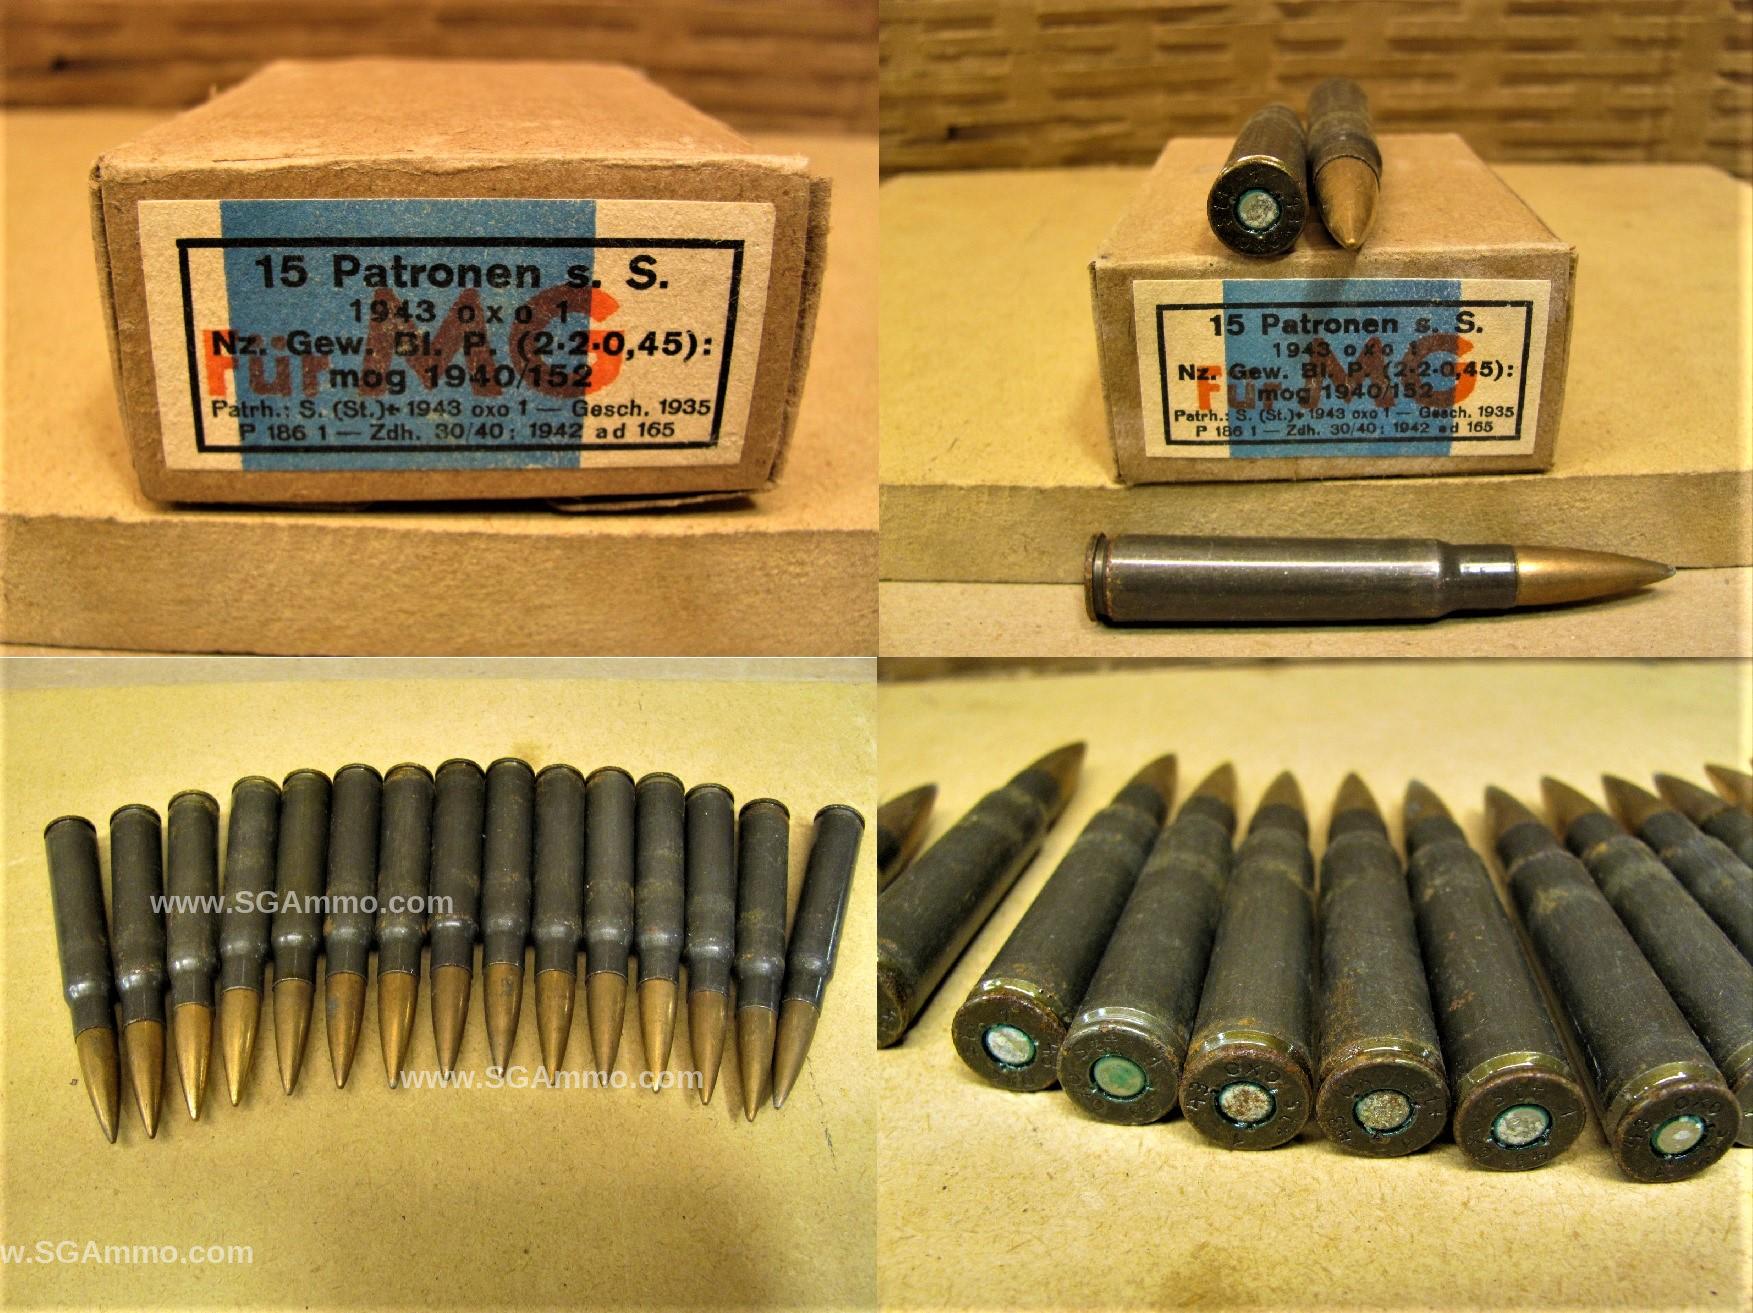 300 Round Pack - 8mm Mauser Patronen S.S. Ball Steel Case WWII Vintage German Ammo For Collector Purposes - Read Description - Sold As-is